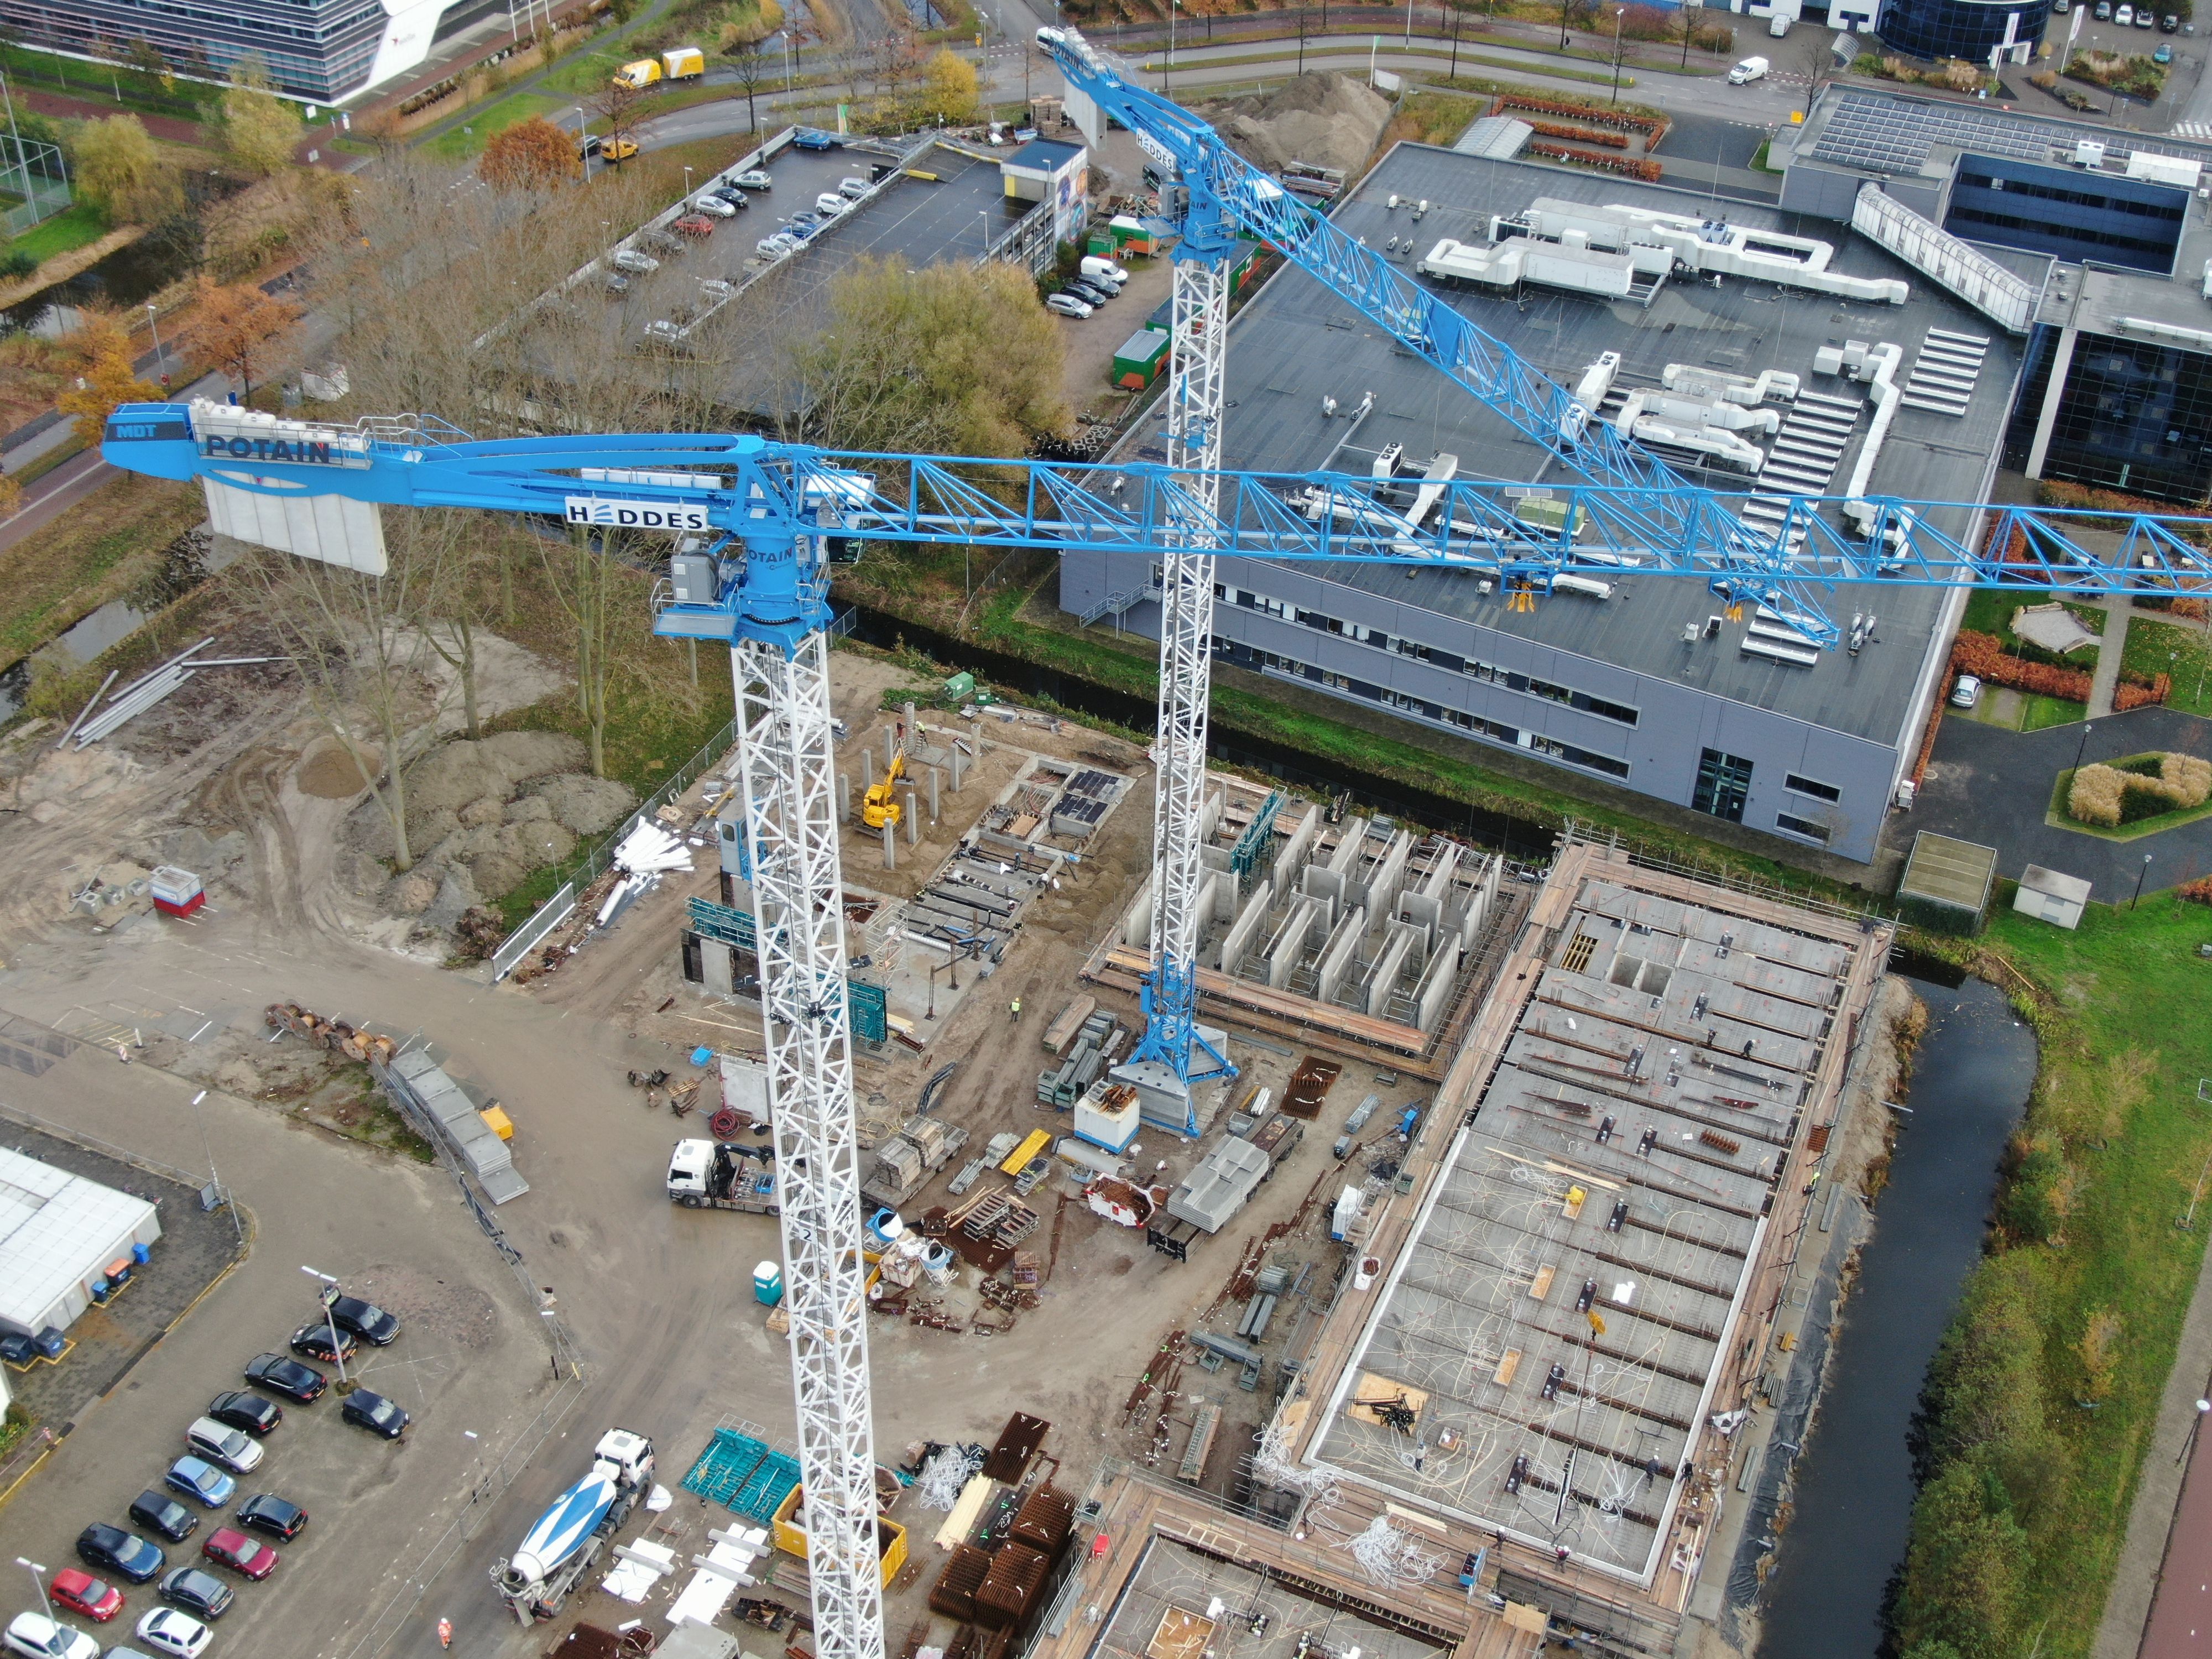 Overview of the construction site.